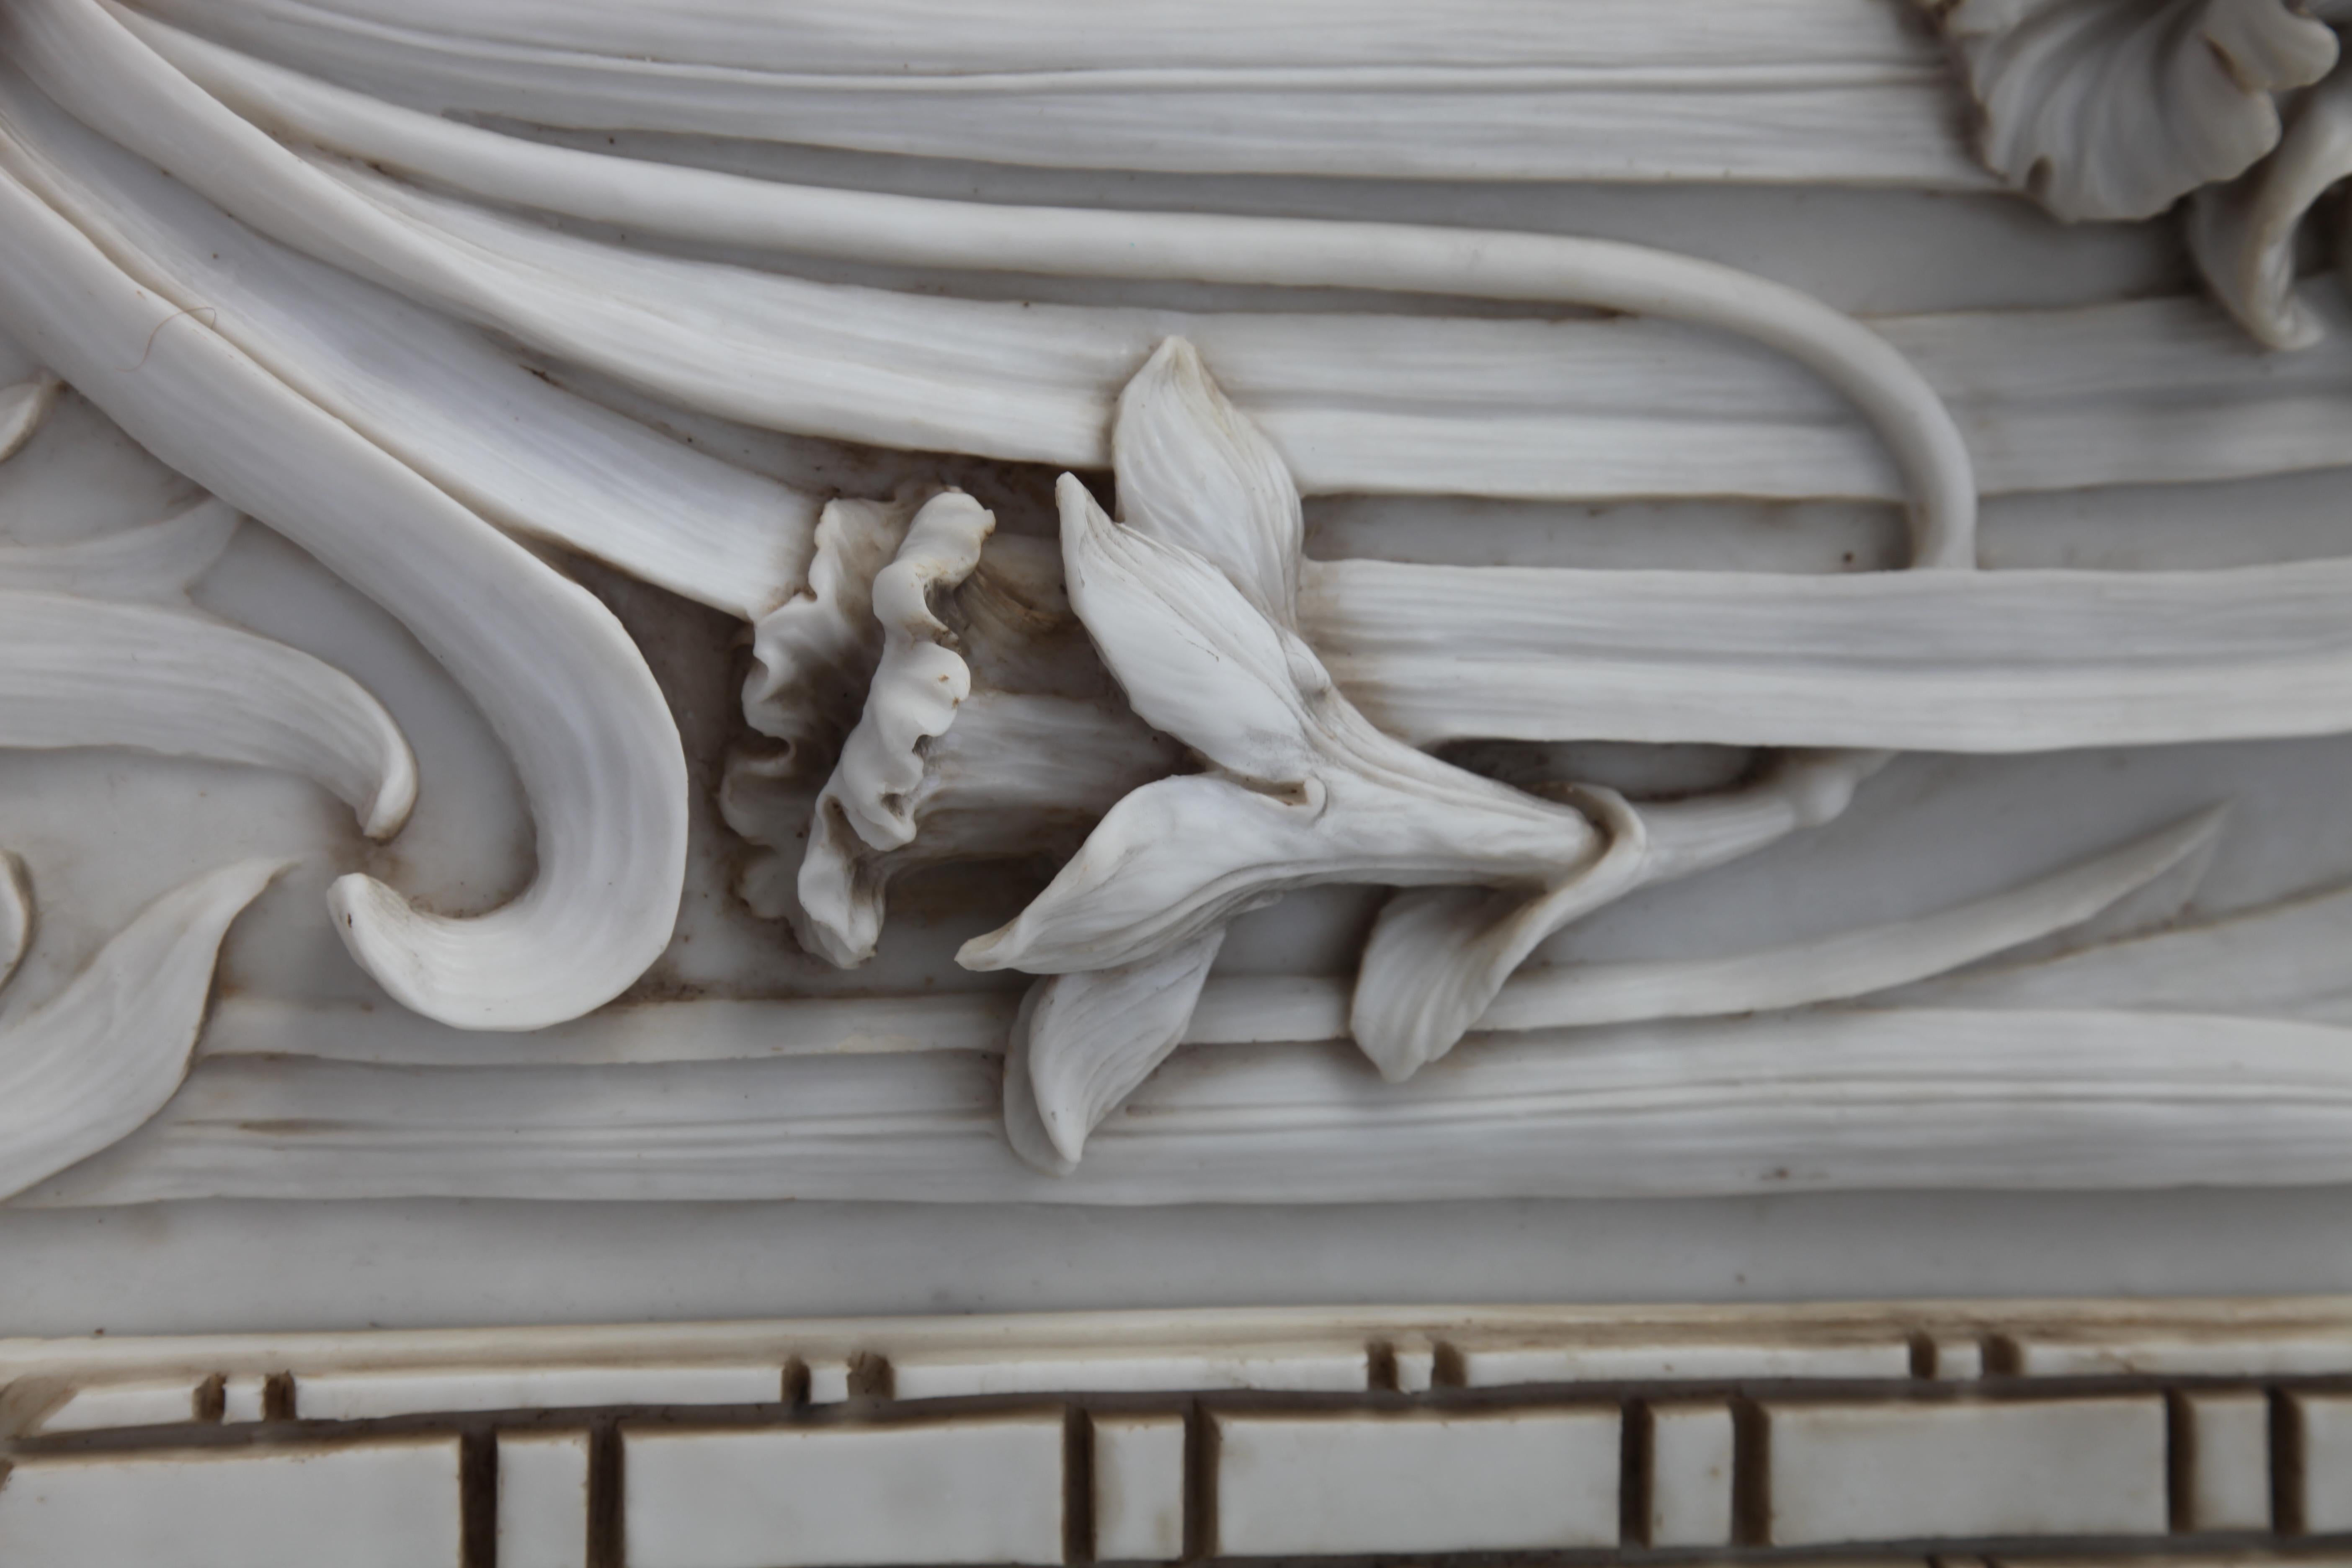 Hand-Carved Art Nouveau 3-D Alabaster Sculptural Panel with Foliage and Daffodils / Jonquils